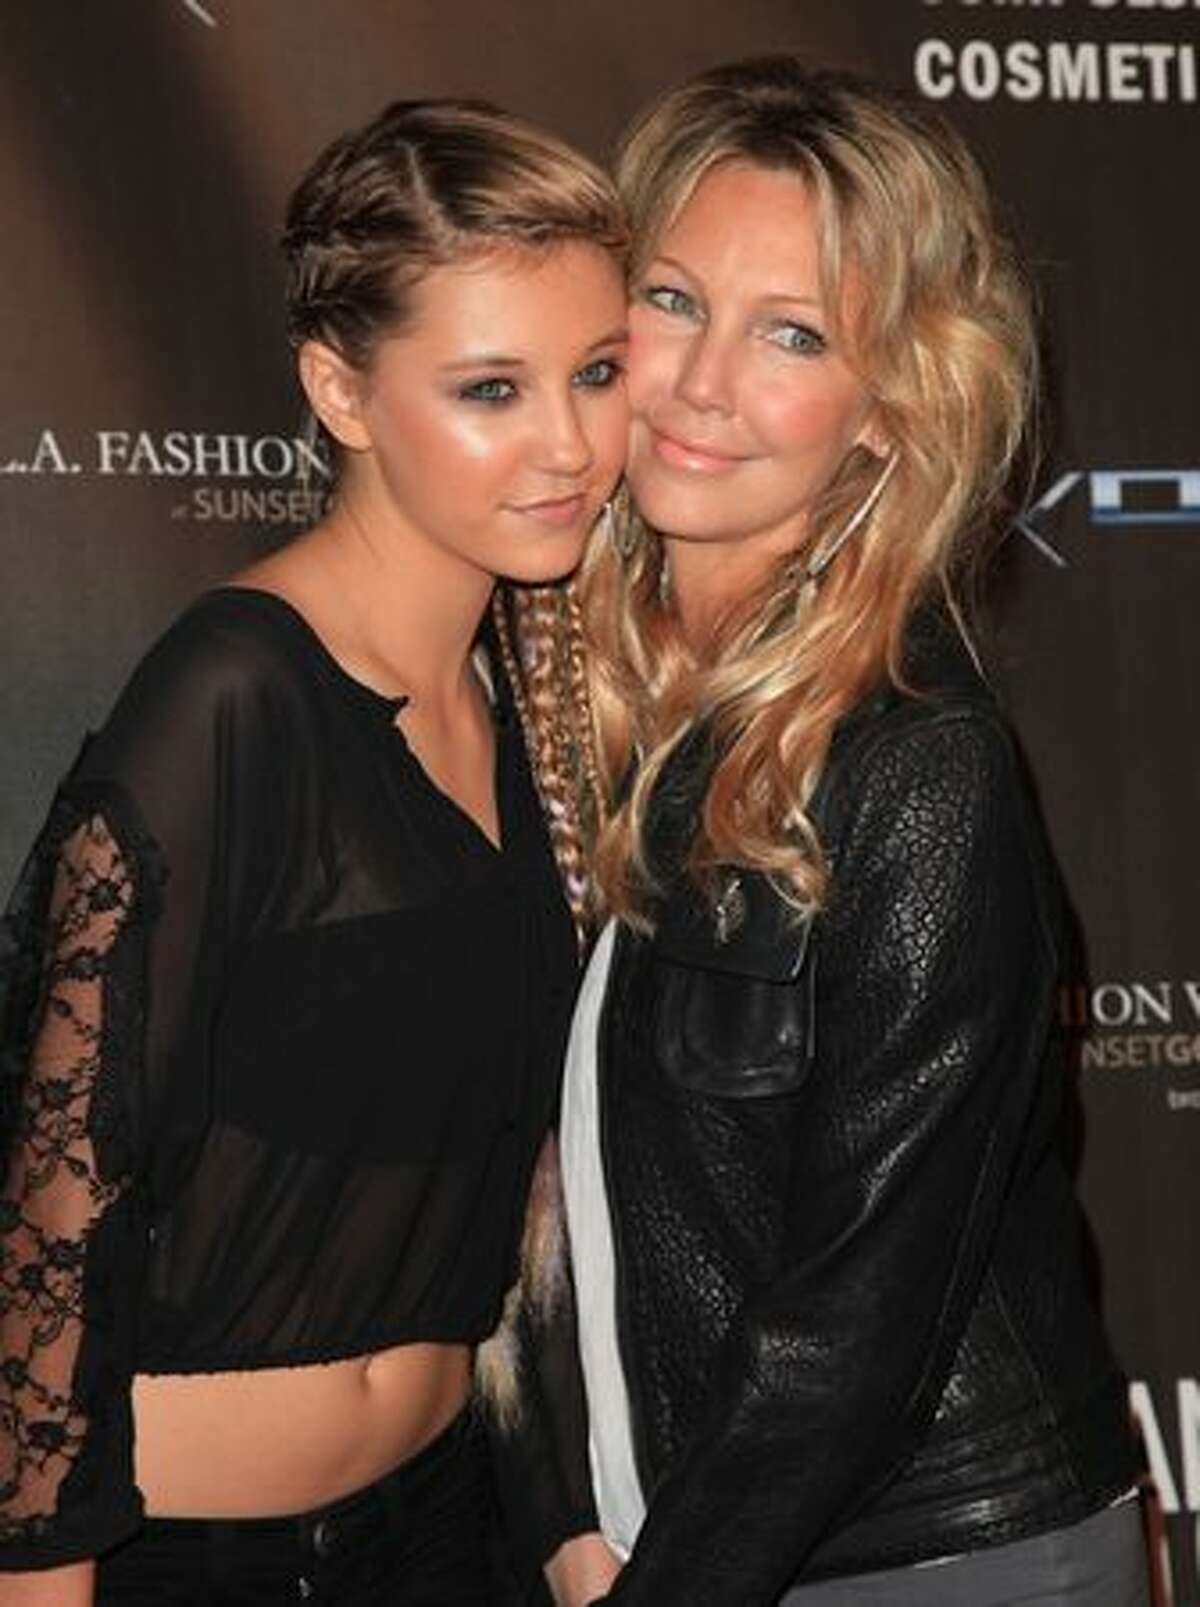 Ava Sambora and her mother Heather Locklear arrive at the WTB Spring 2011 Fashion Show at Sunset Gower Studios in Los Angeles, California.